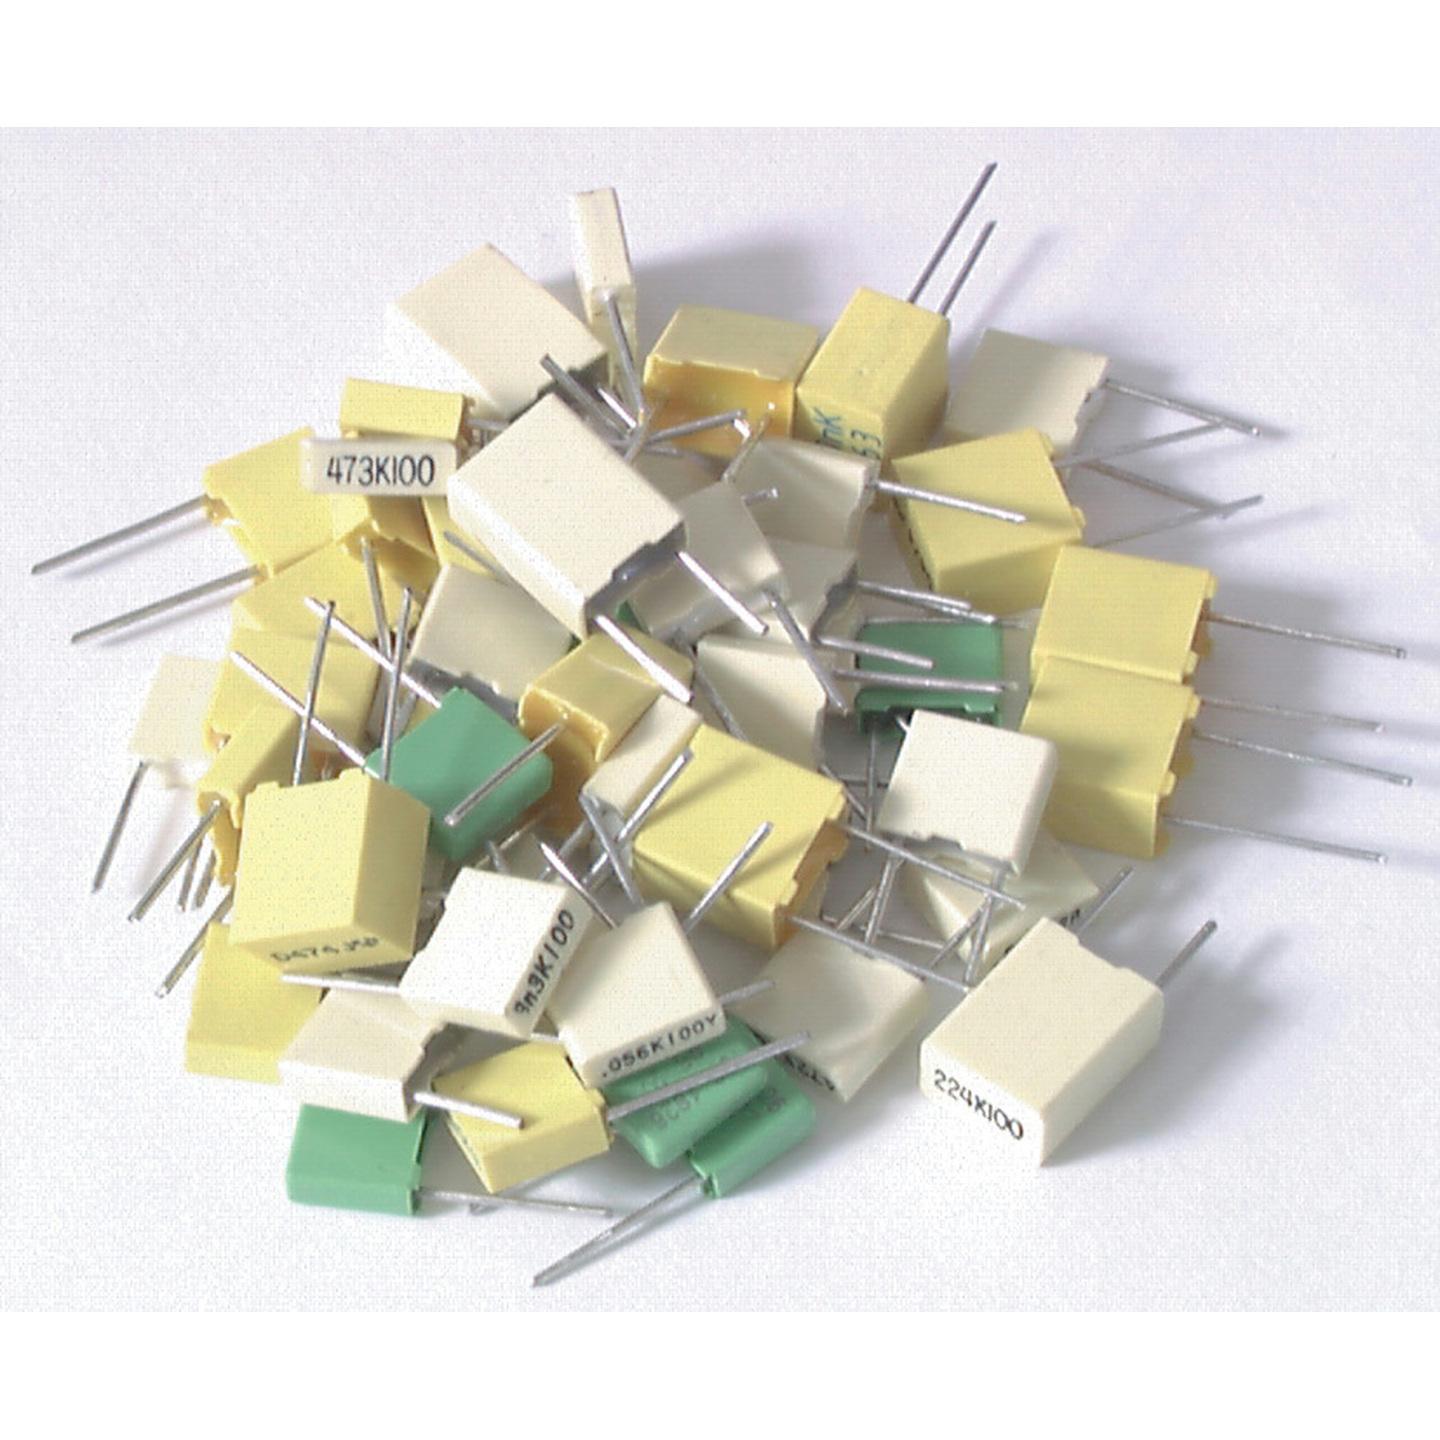 MKT Capacitor Pack - 50 pieces